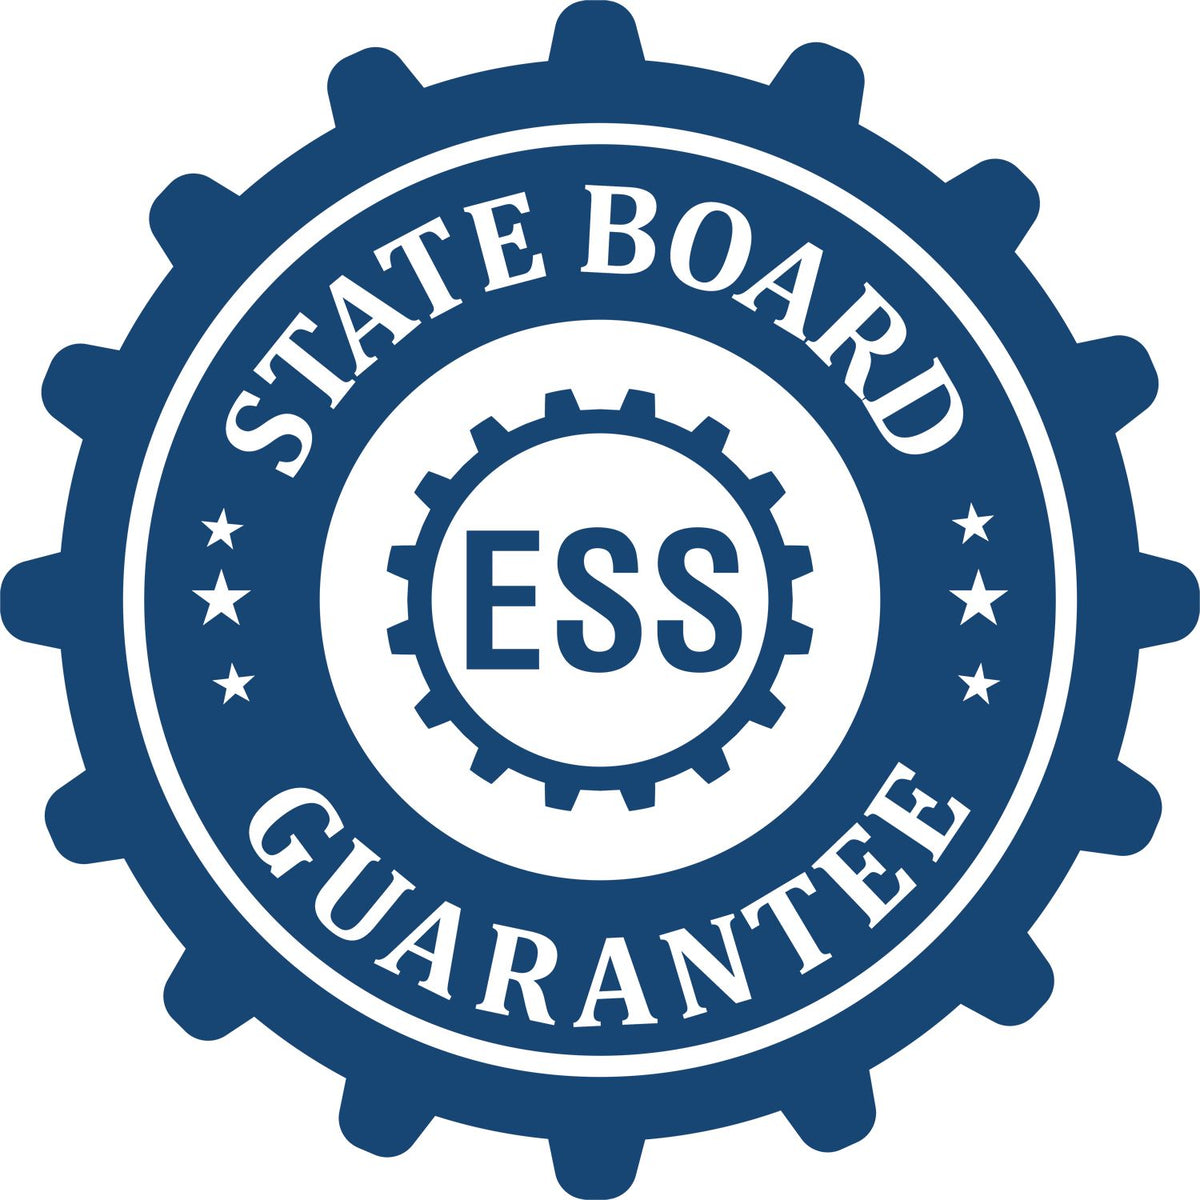 An emblem in a gear shape illustrating a state board guarantee for the Soft Ohio Professional Engineer Seal product.